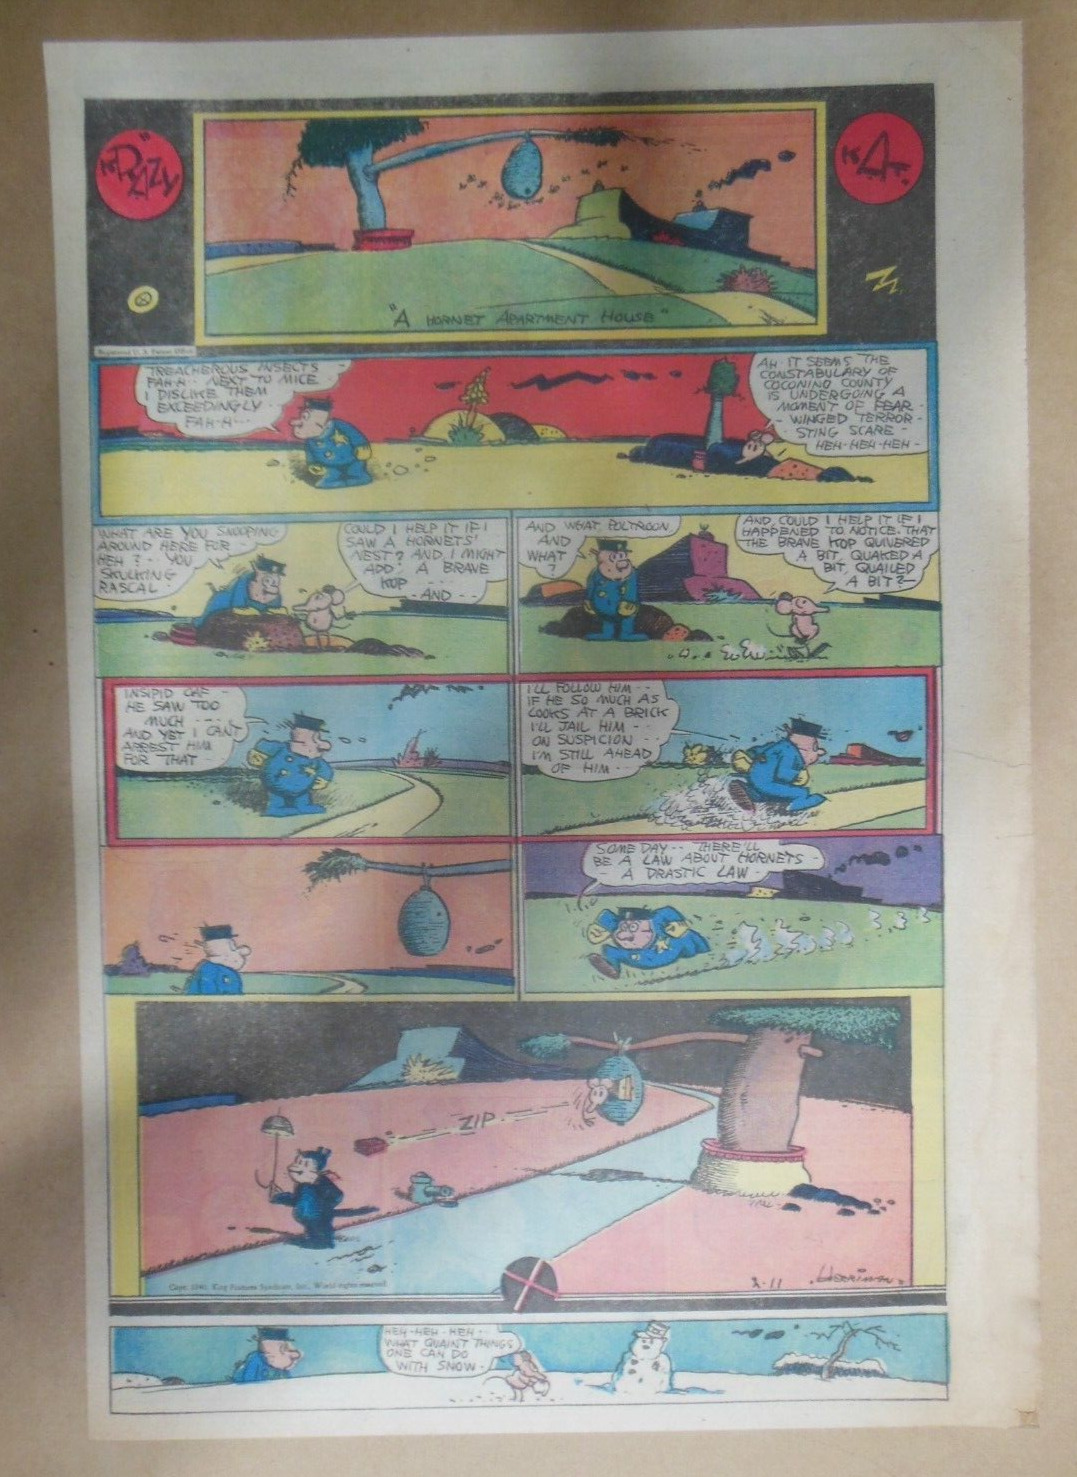 Krazy Kat Sunday Page by George Herriman from 2/11/1940 Size: 11 x 15 inch Rare